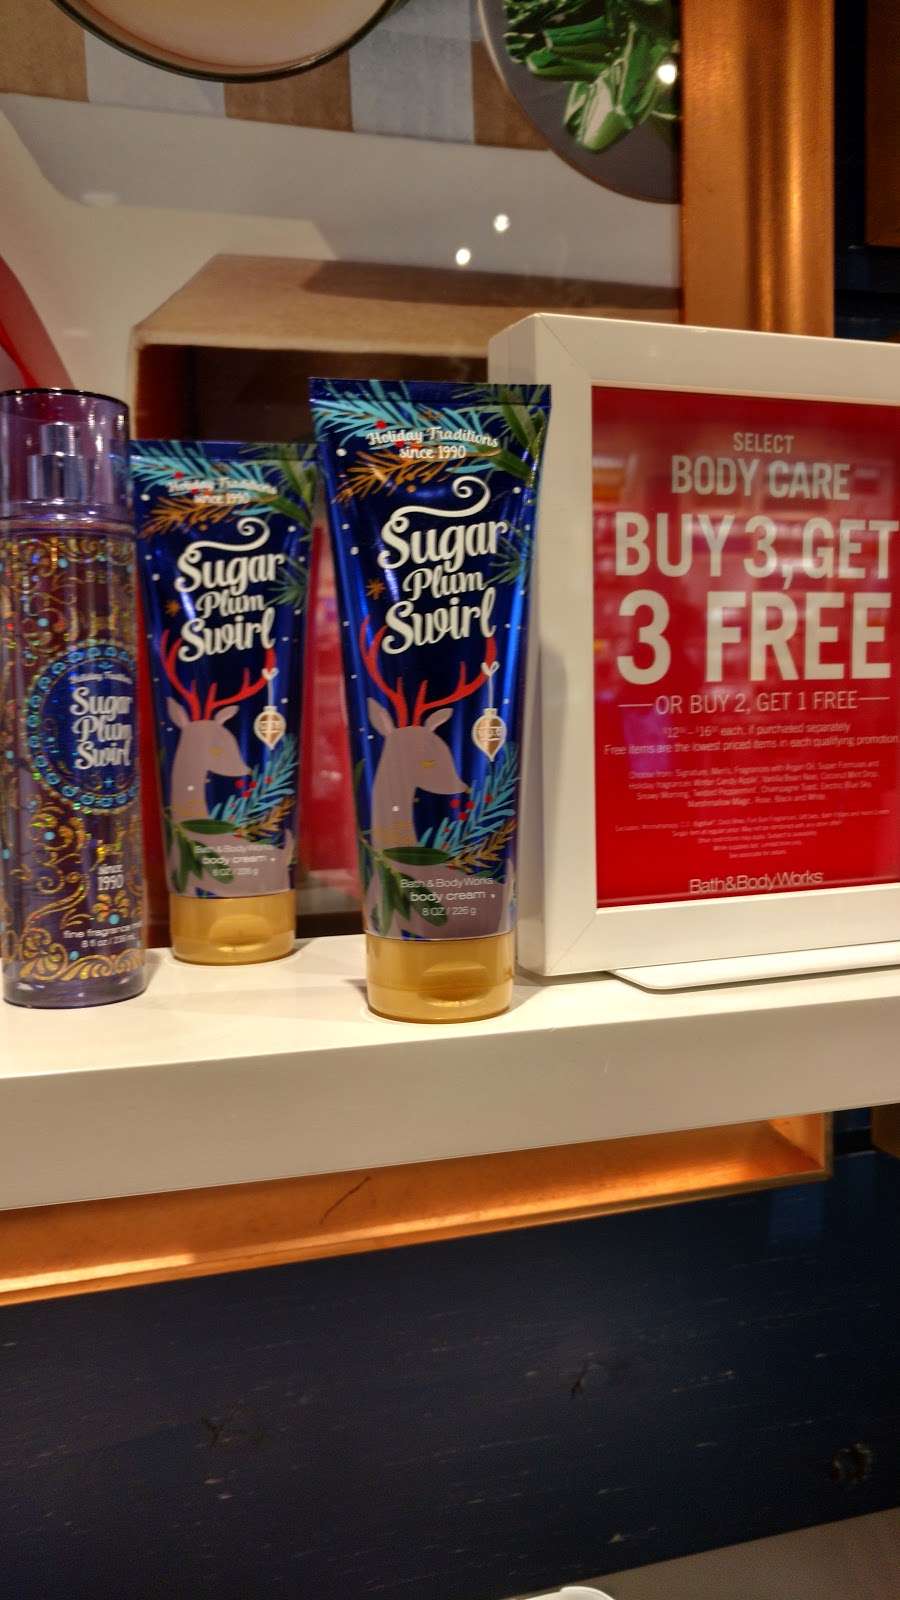 Bath & Body Works | 280 S. State Rd 434 West Town Corners, Altamonte Springs, FL 32714 | Phone: (407) 862-9150